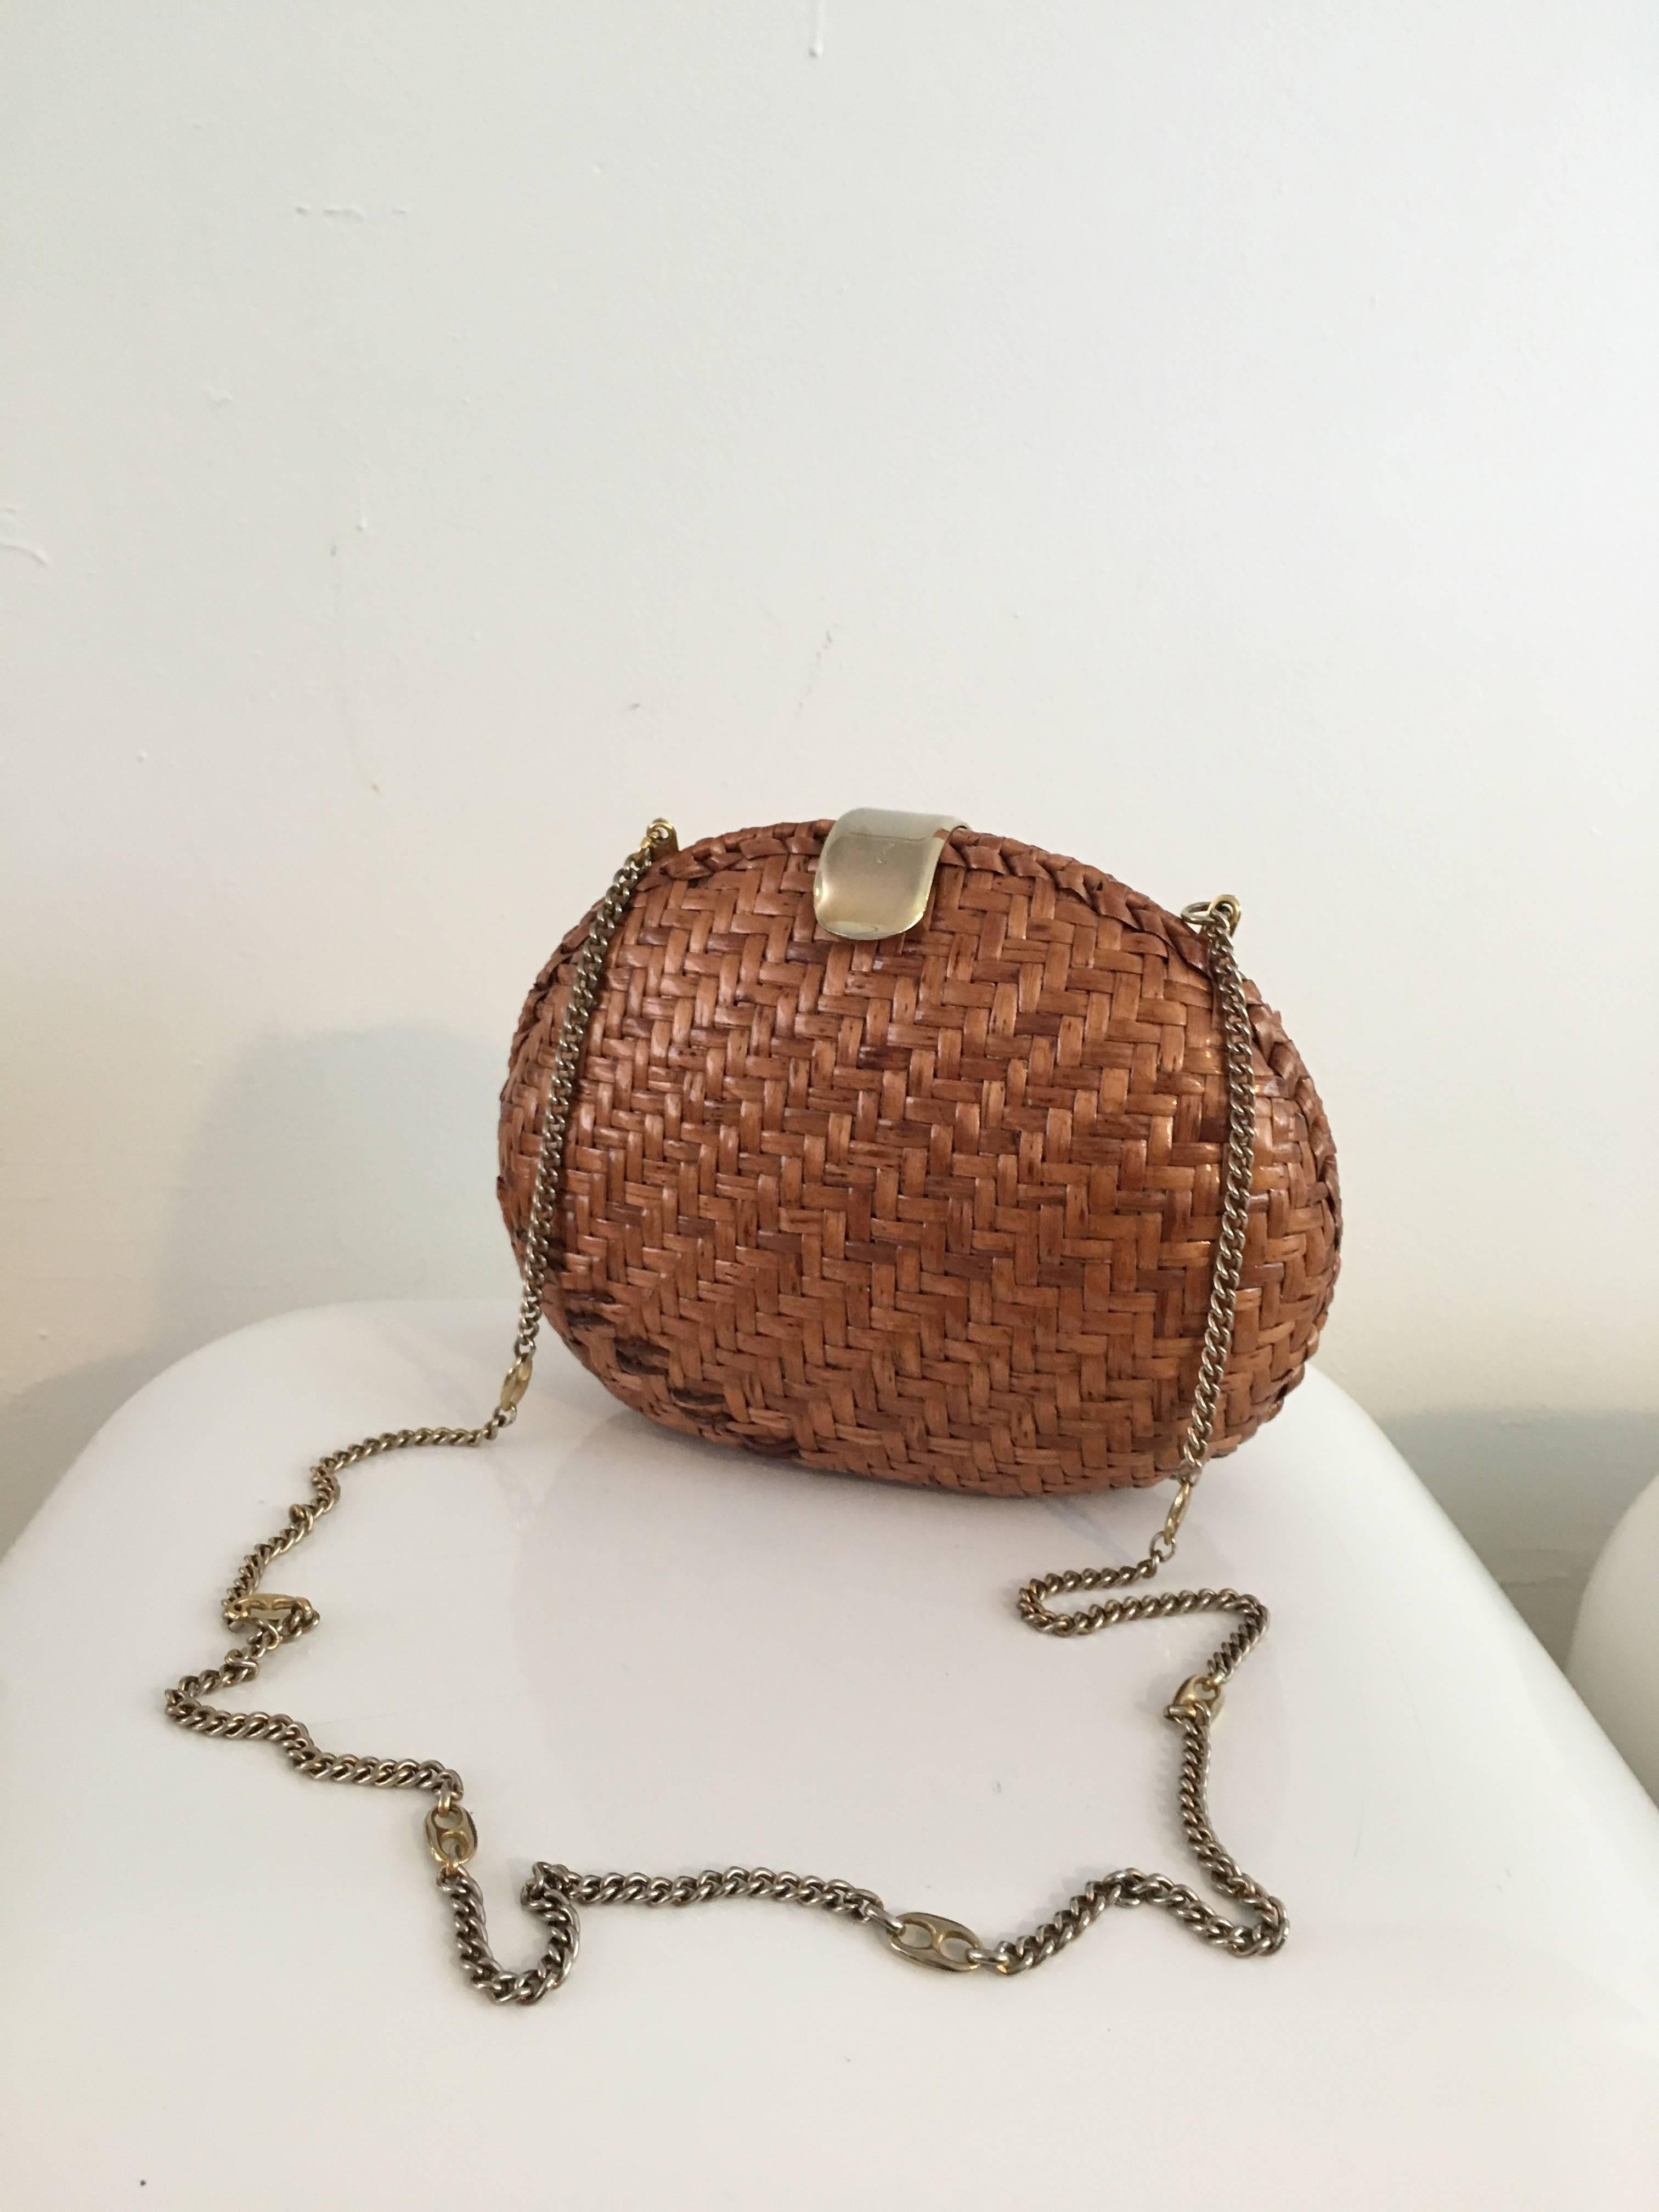 1960s brown rattan shoulder handbag / clutch with brass snap closure is made in Italy.  The interior is made of nice soft cream leather with one zipper compartment.  This is one very timeless shoulder bag / clutch that will have all your girlfriends